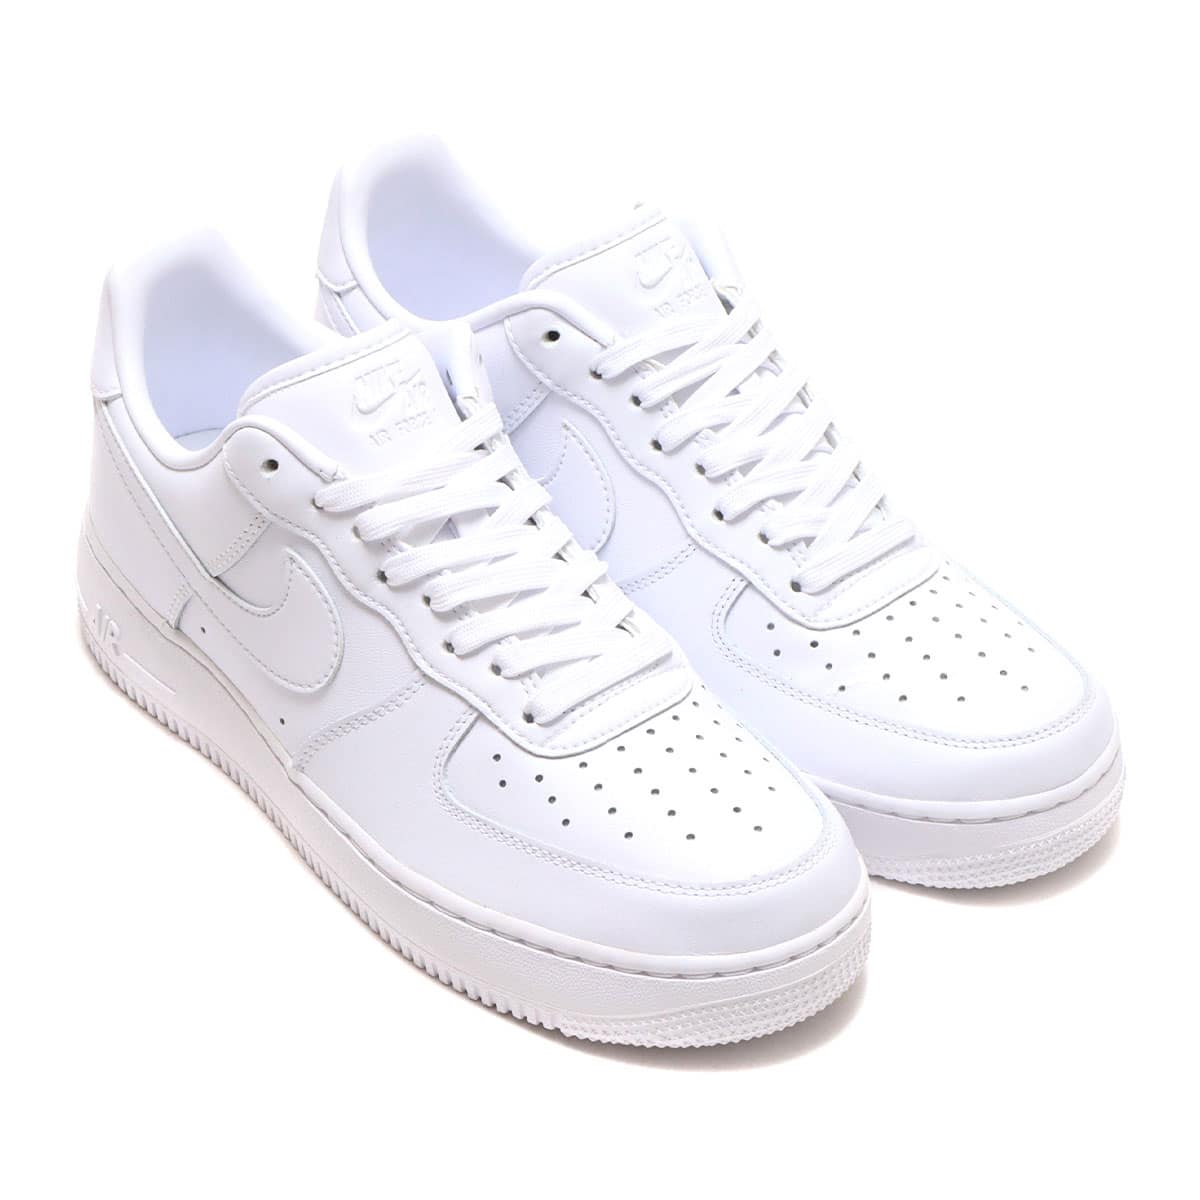 NIKE AIRFORCE1 LOW 07 オールホワイト